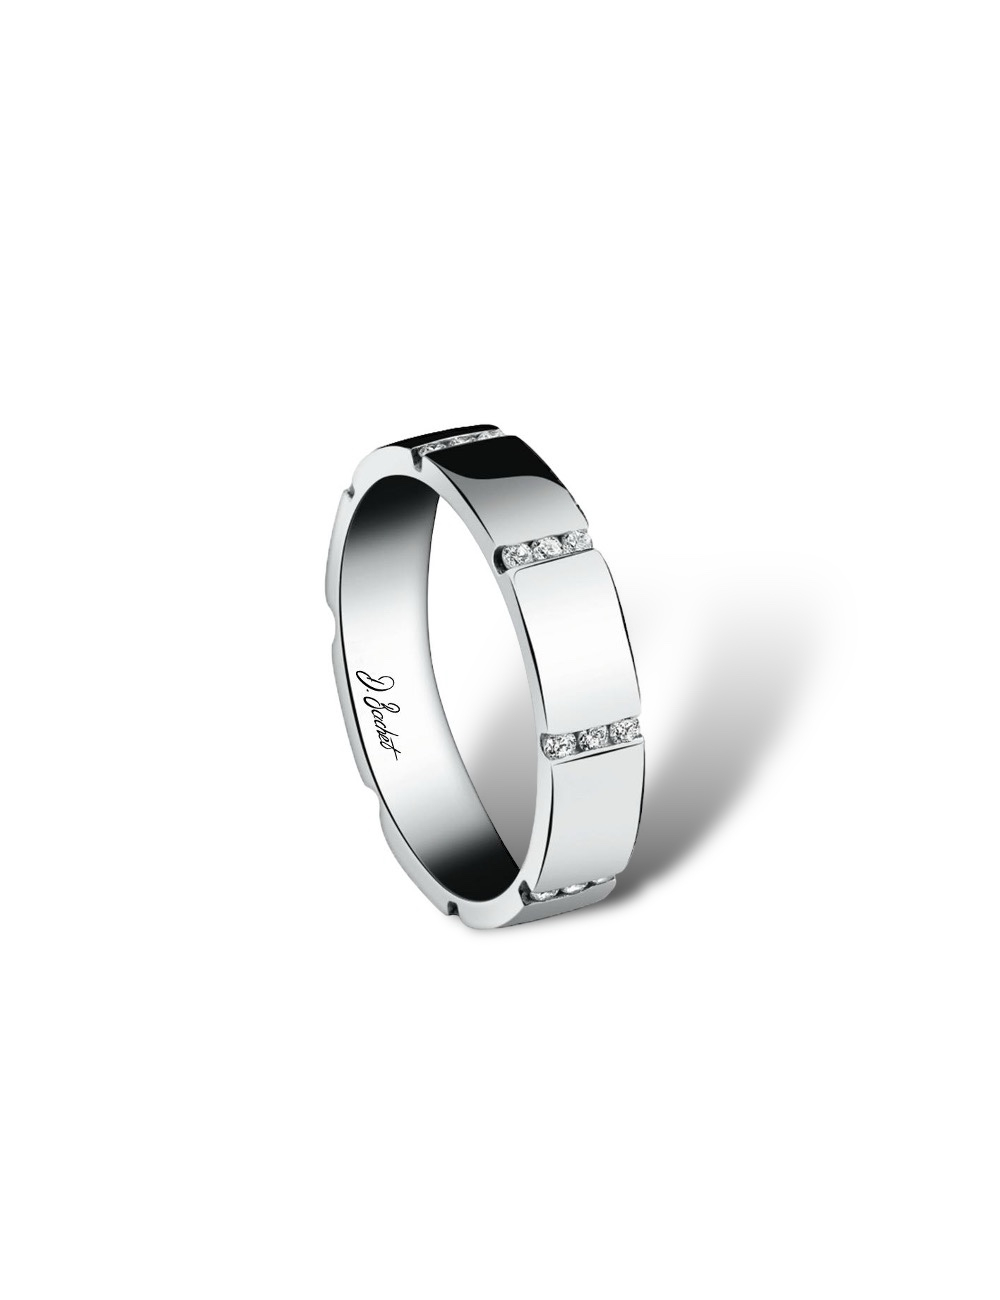 Modern, sophisticated women's wedding band, breaking conventions, with 8 rows of white diamonds symbolizing eternal unity.